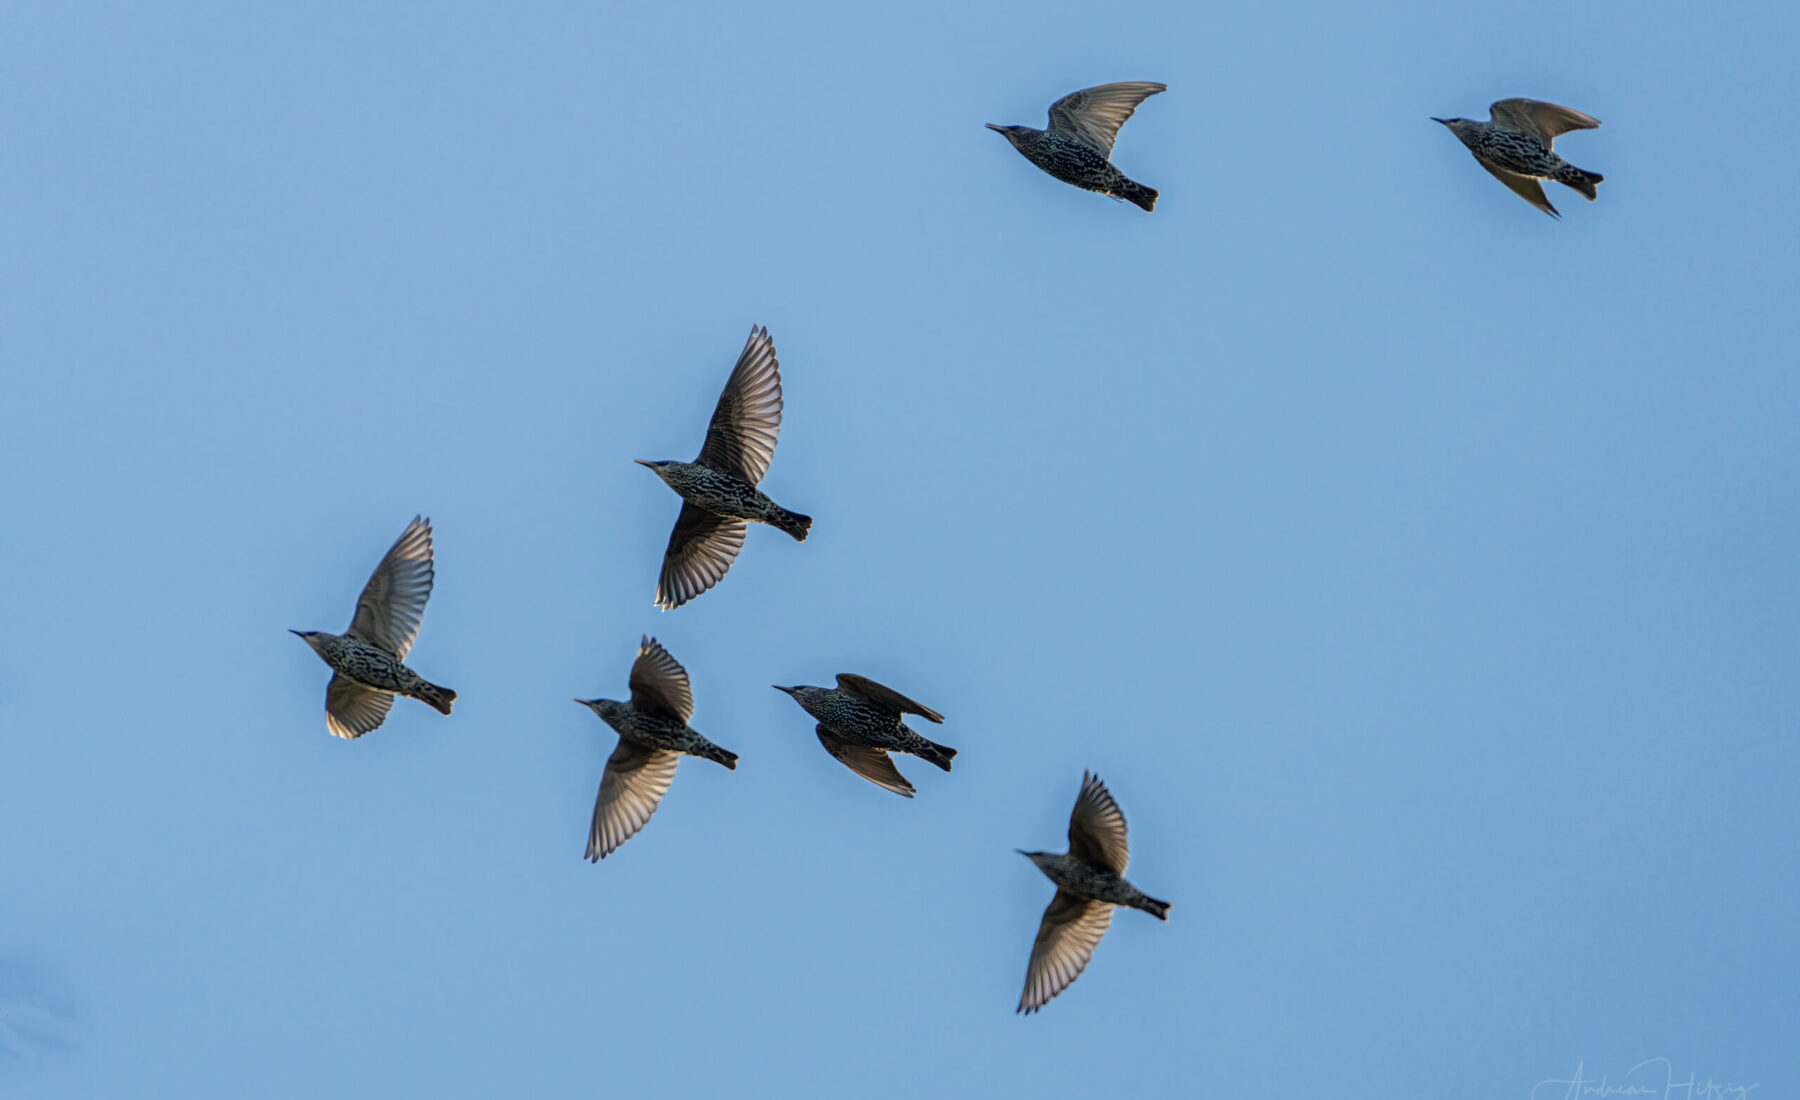 2022-12-17 Starlings from October to December